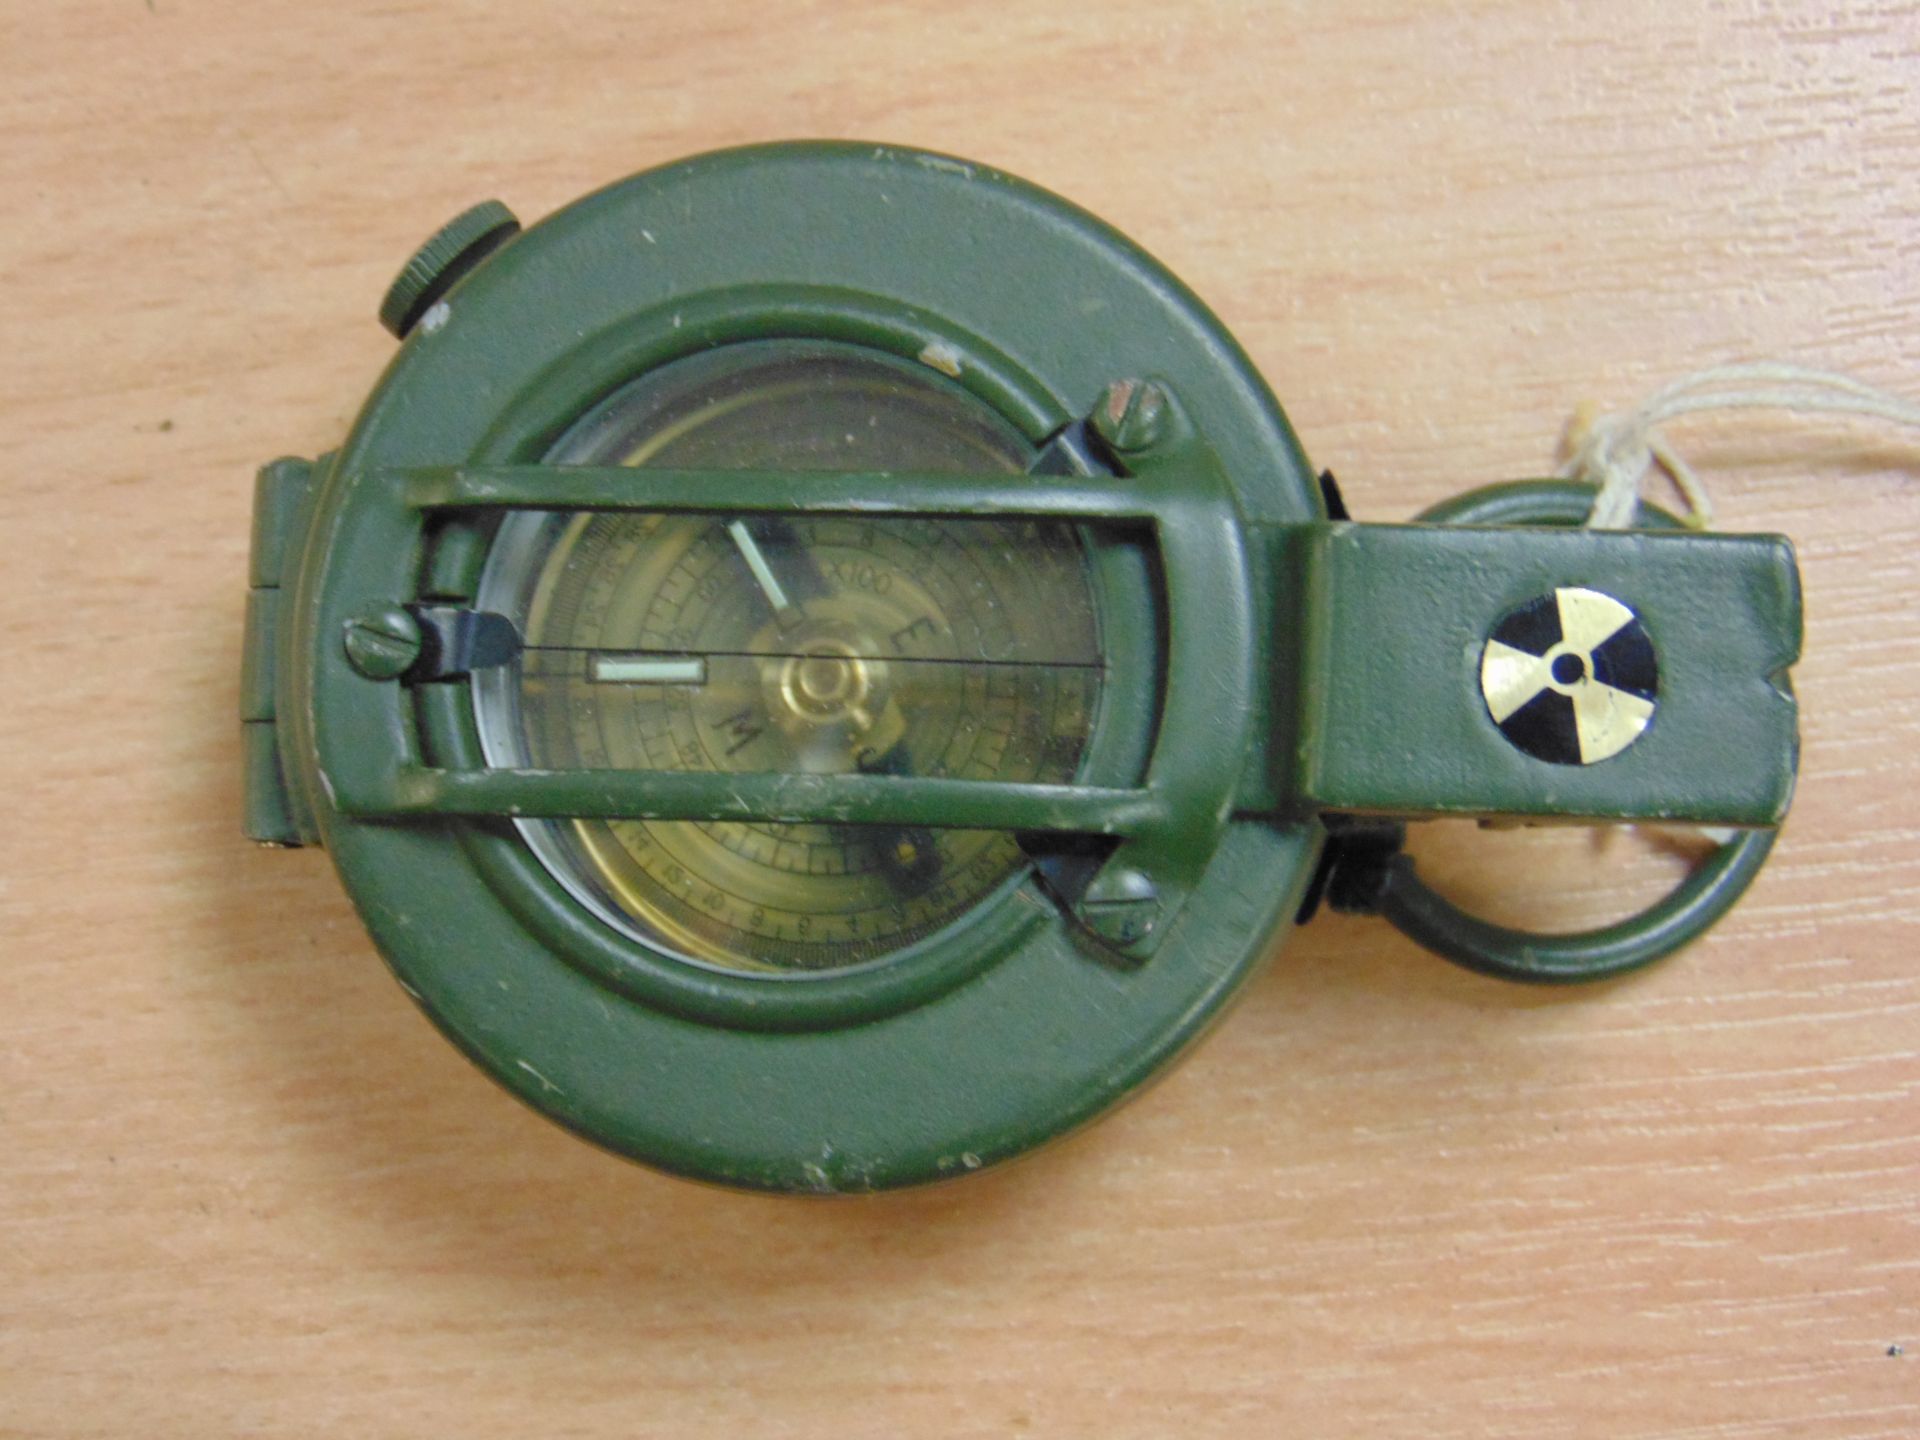 STANLEY- LONDON BRITISH ARMY PRISMATIC COMPASS WITH NATO MARKINGS AND CALIBRATED IN MILS UNISSUED